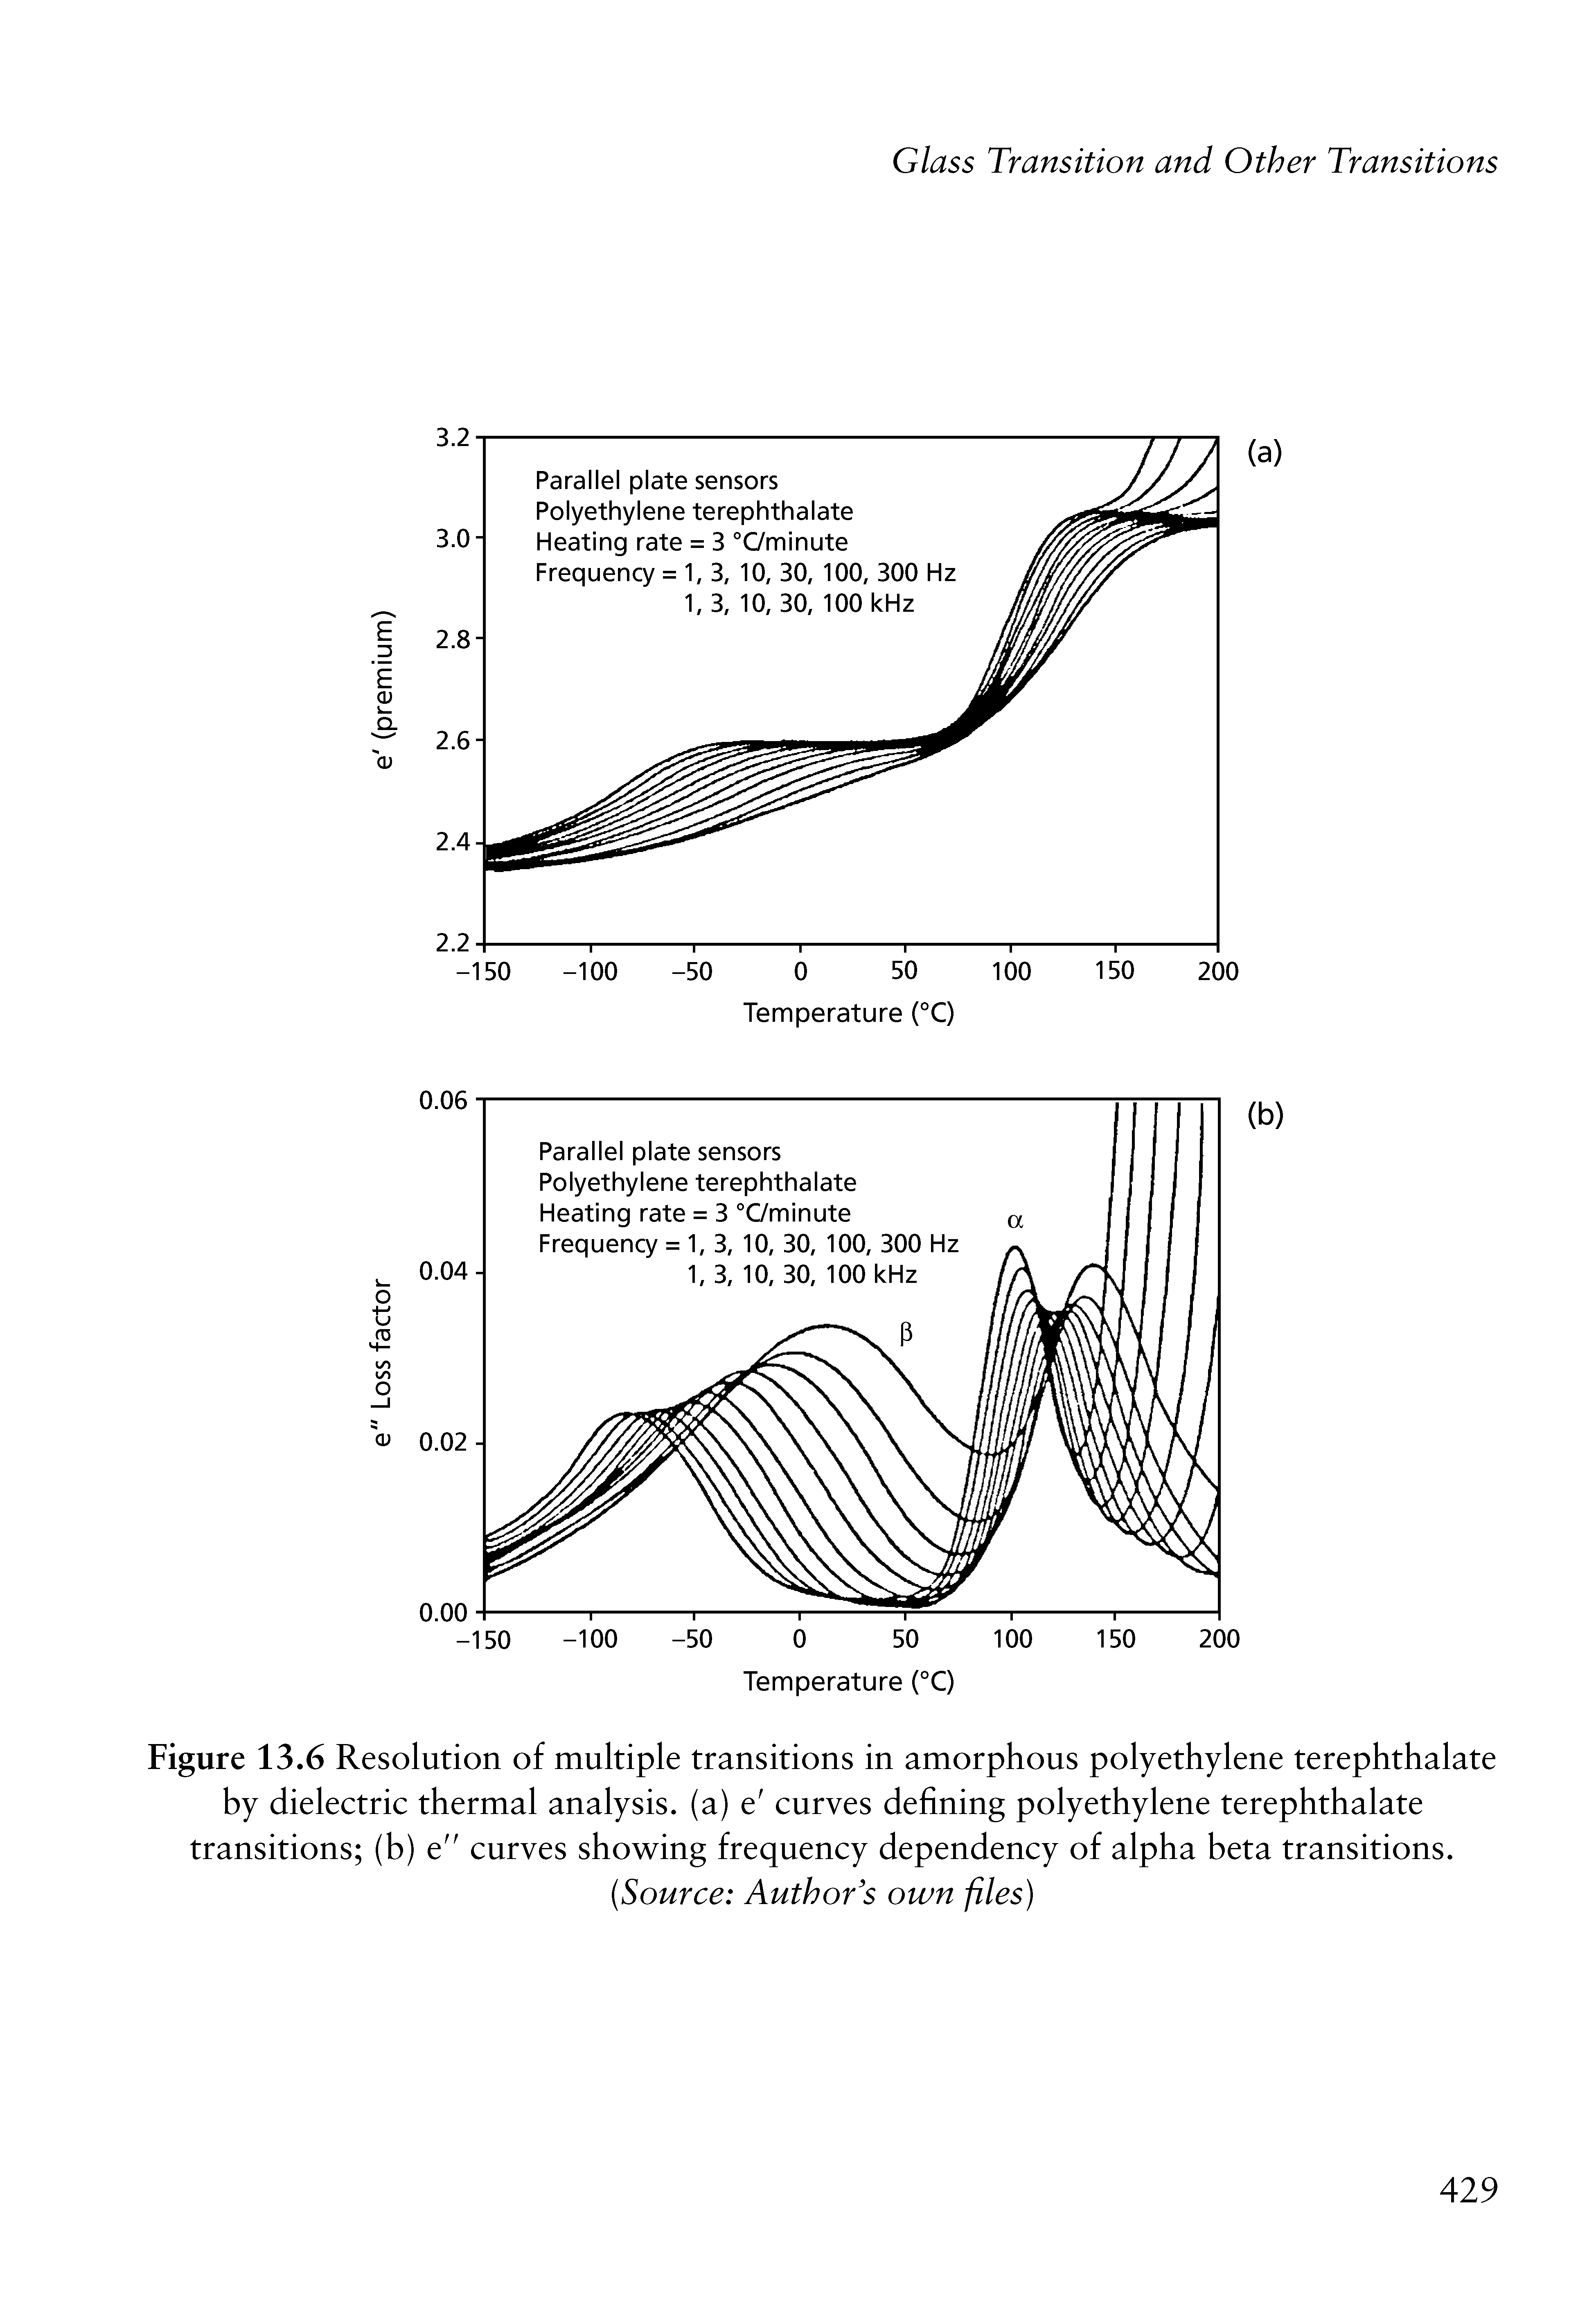 Figure 13.6 Resolution of multiple transitions in amorphous polyethylene terephthalate by dielectric thermal analysis, (a) e curves defining polyethylene terephthalate transitions (b) e" curves showing frequency dependency of alpha beta transitions.